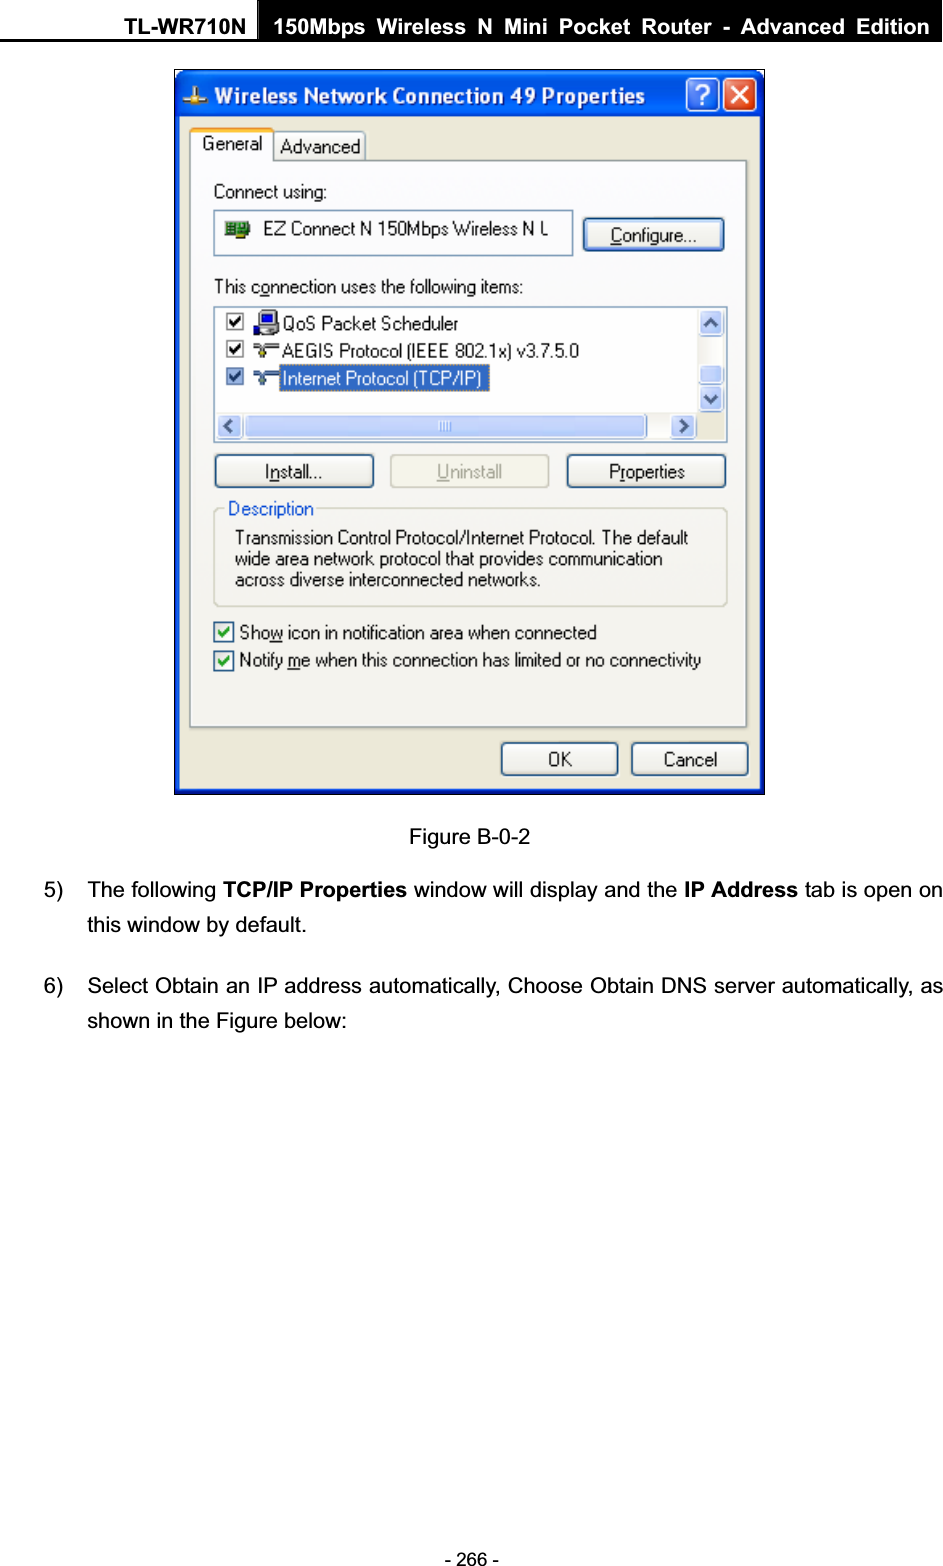 TL-WR710N  150Mbps Wireless N Mini Pocket Router - Advanced Edition- 266 - Figure B-0-2 5) The following TCP/IP Properties window will display and the IP Address tab is open on this window by default. 6)  Select Obtain an IP address automatically, Choose Obtain DNS server automatically, as shown in the Figure below: 